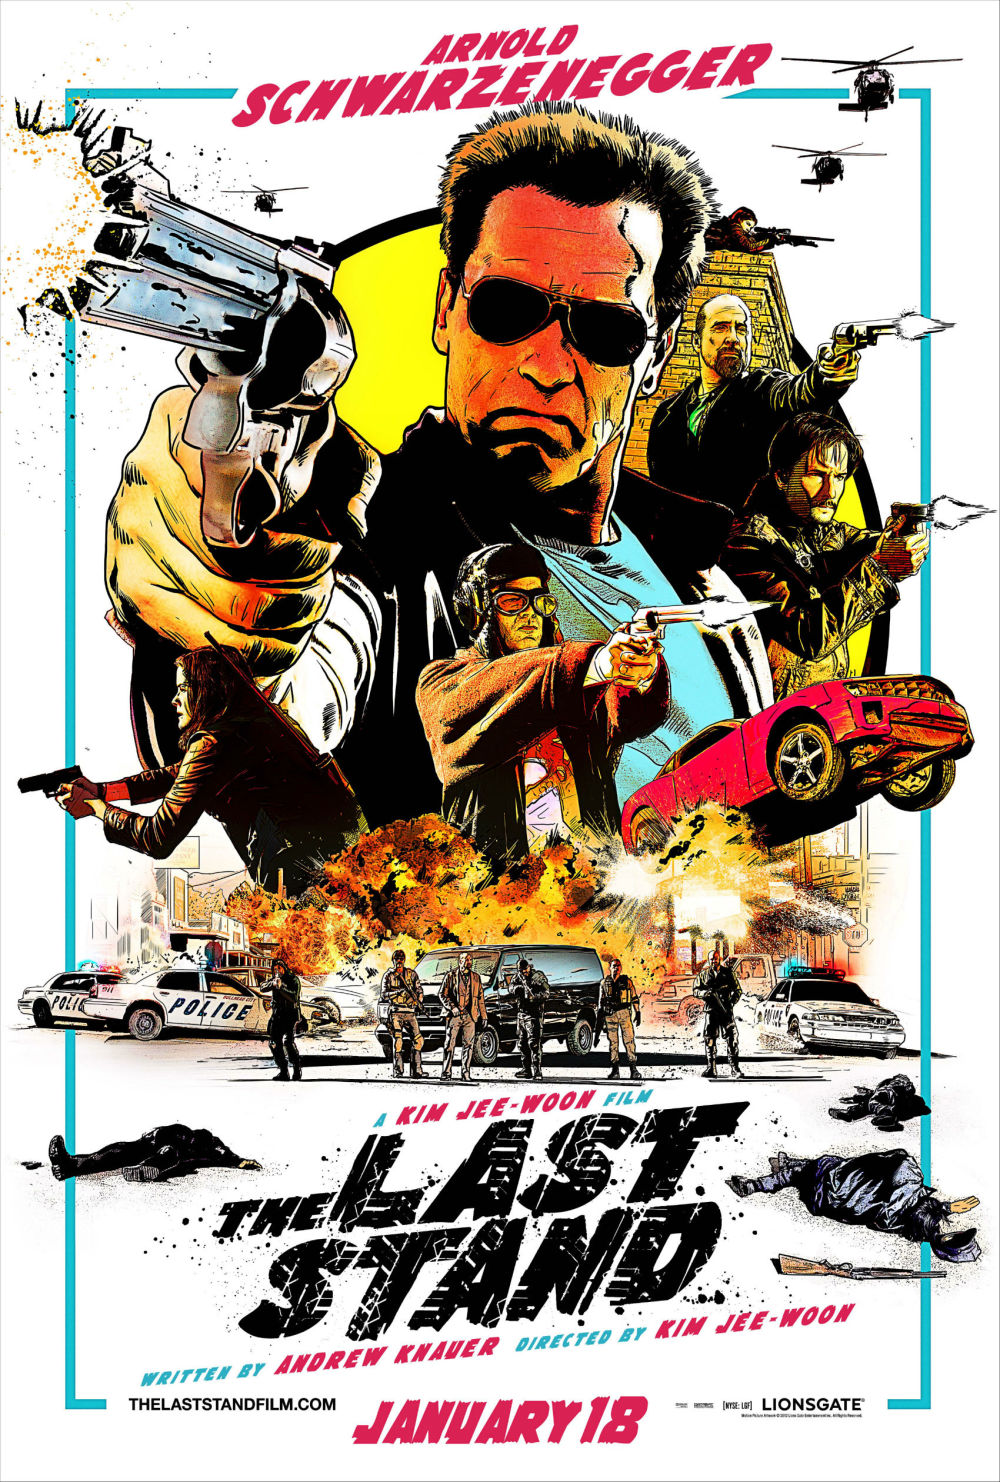 Wederom een Comic Con poster 'The Last Stand'